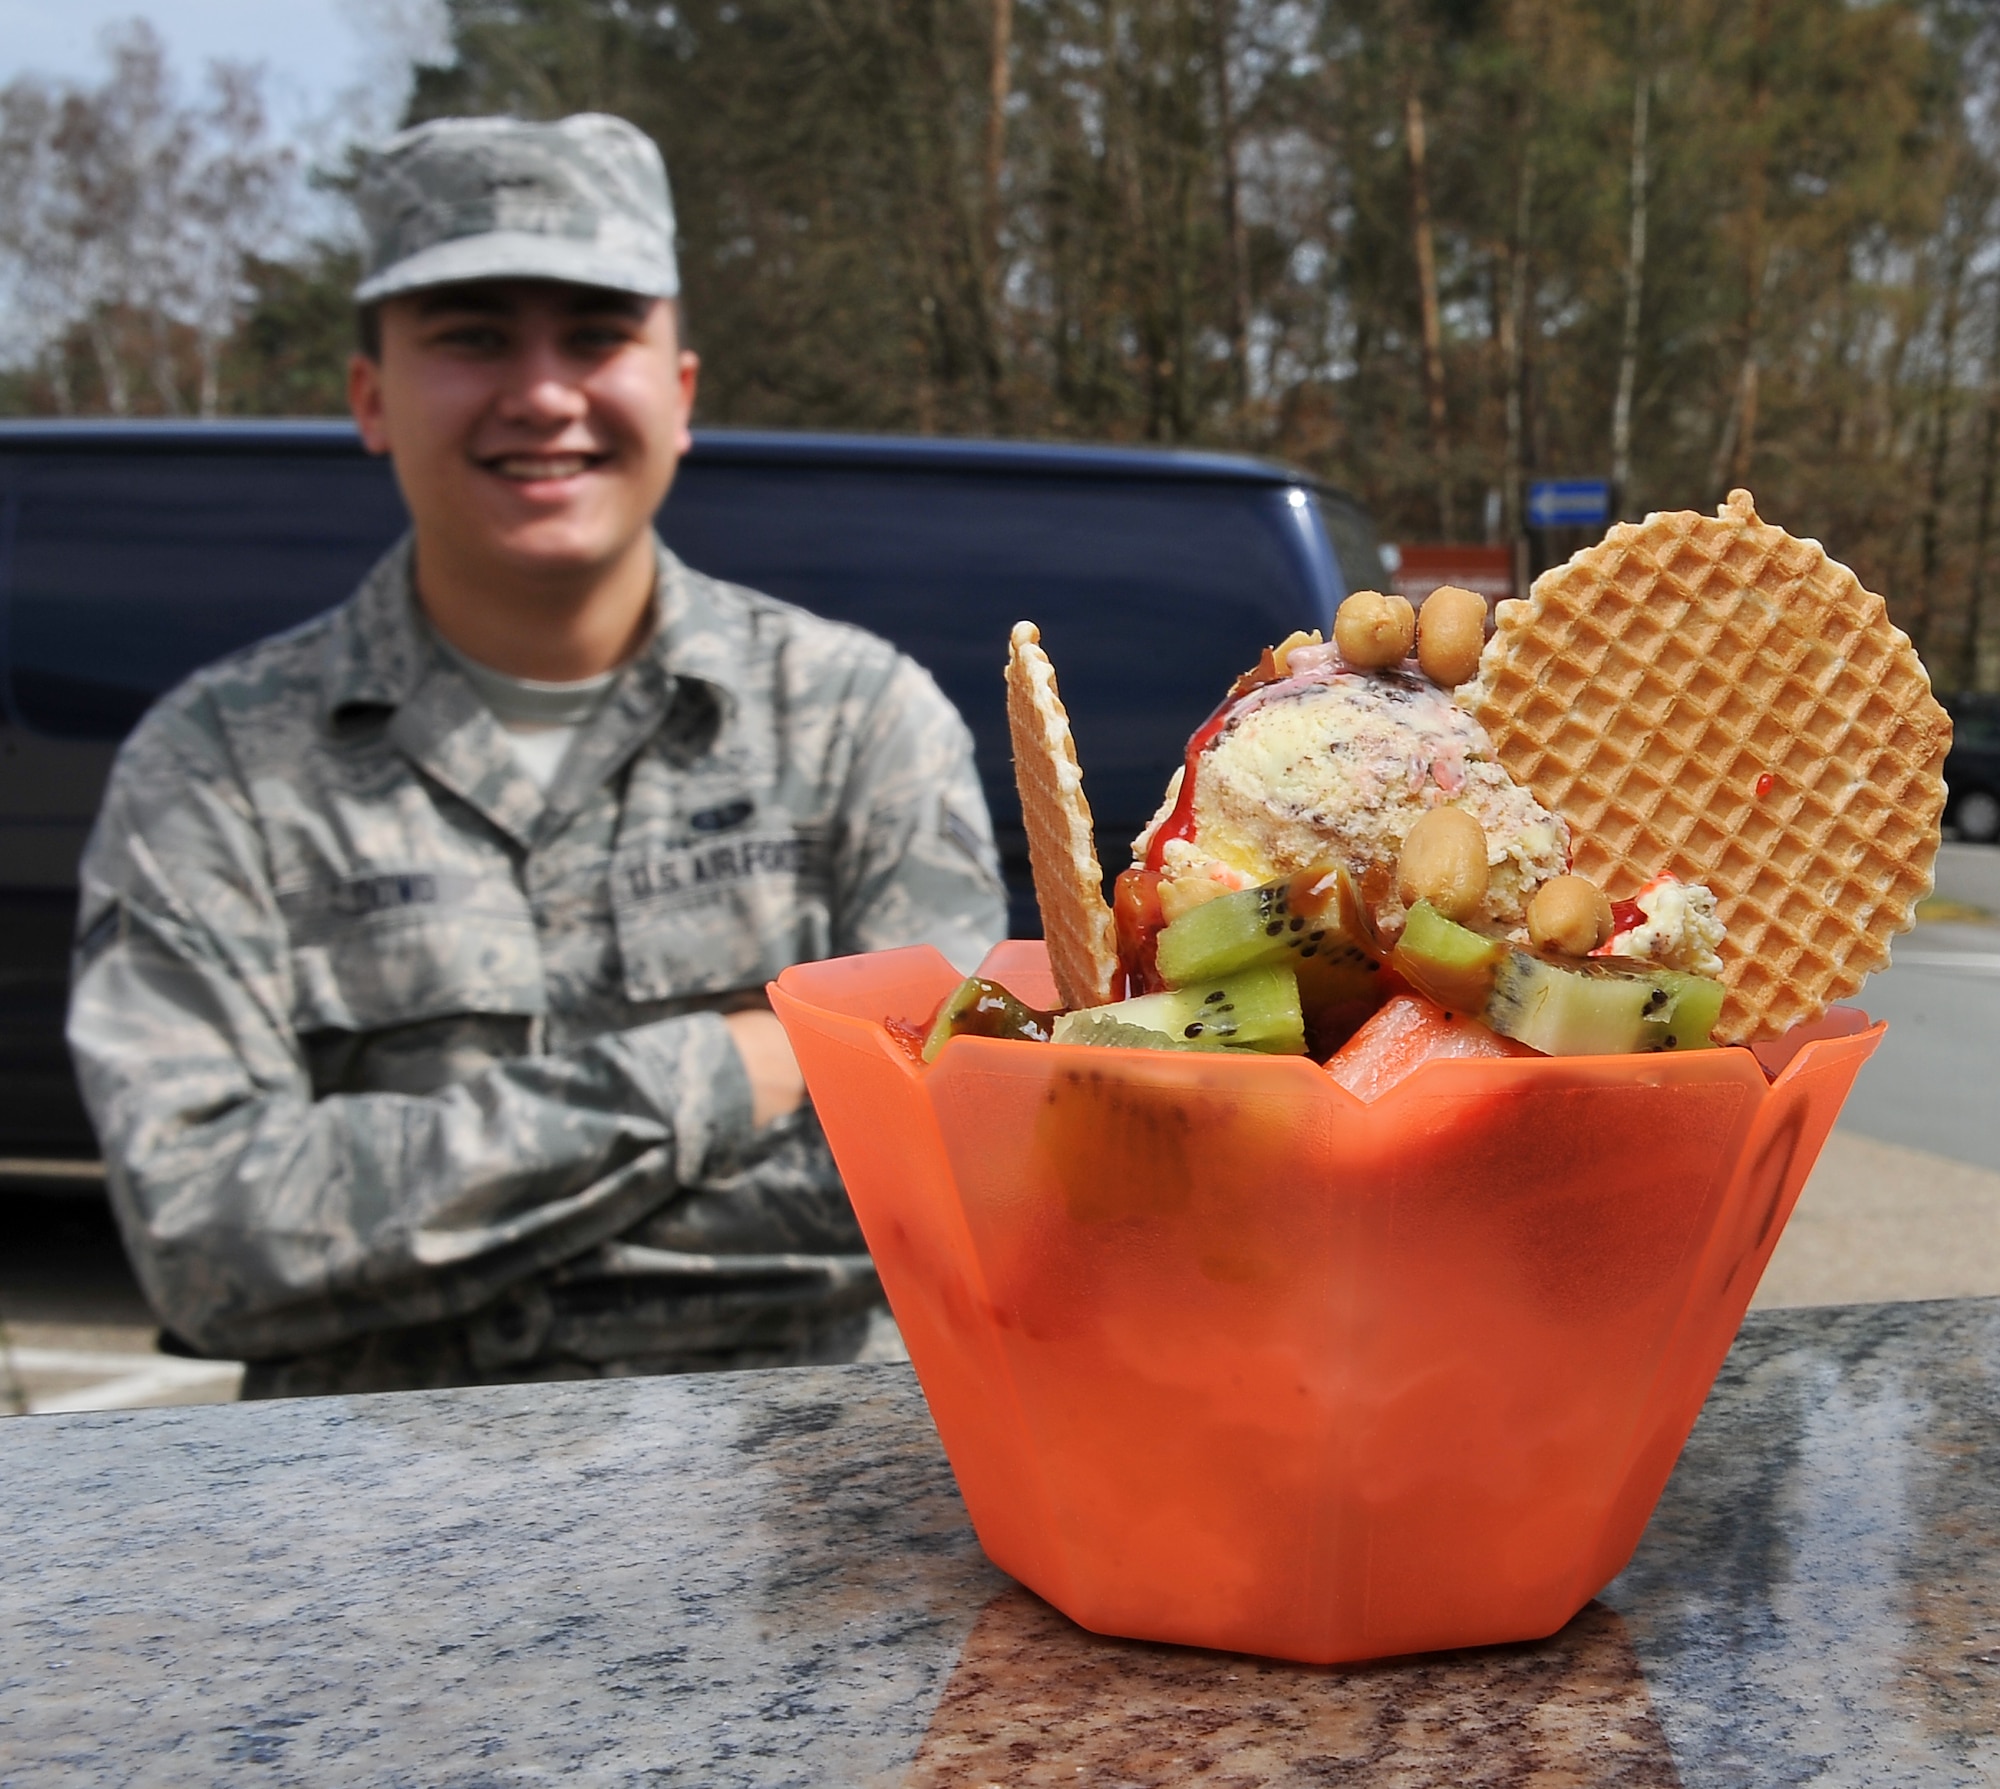 Airman 1st Class Erick Dowd, 4th component maintainer squadron Avionics technician waits on the completion of his frozen treat, April 19, 2013, Ramstein Air Base, Germany. Fabio Montebello, known by base locals as “Fabio the gelato man,” is an ice cream vendor who travels more than an hour away every day to deliver frozen treats to the base. (U.S. Air Force photo/Airman 1st Class Dymekre Allen)     